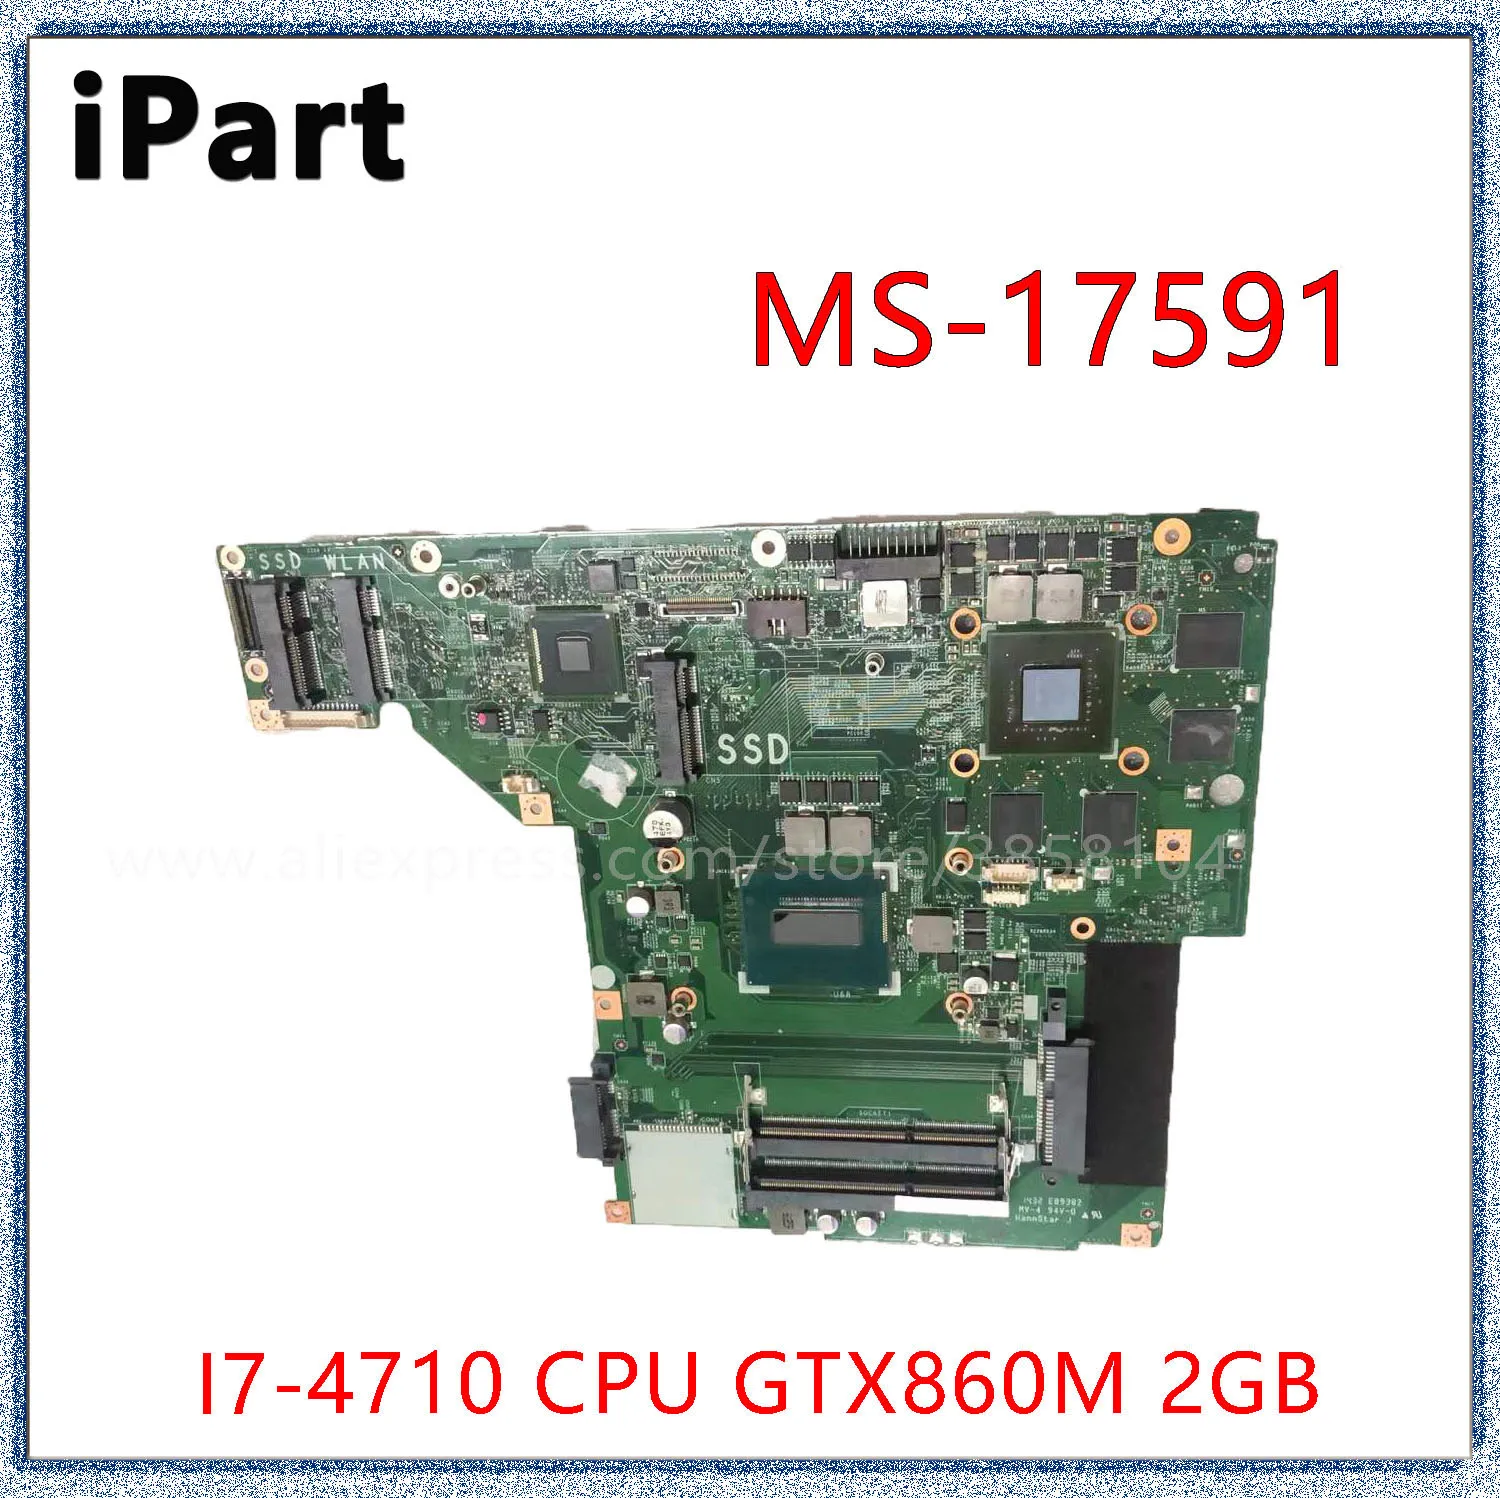 

SHELI For MS-17591 Motherboard MSI GE70 Notebook Motherboard BGA CPU I7-4710 GTX860M 2G HM87 DDR3 100% Test Work